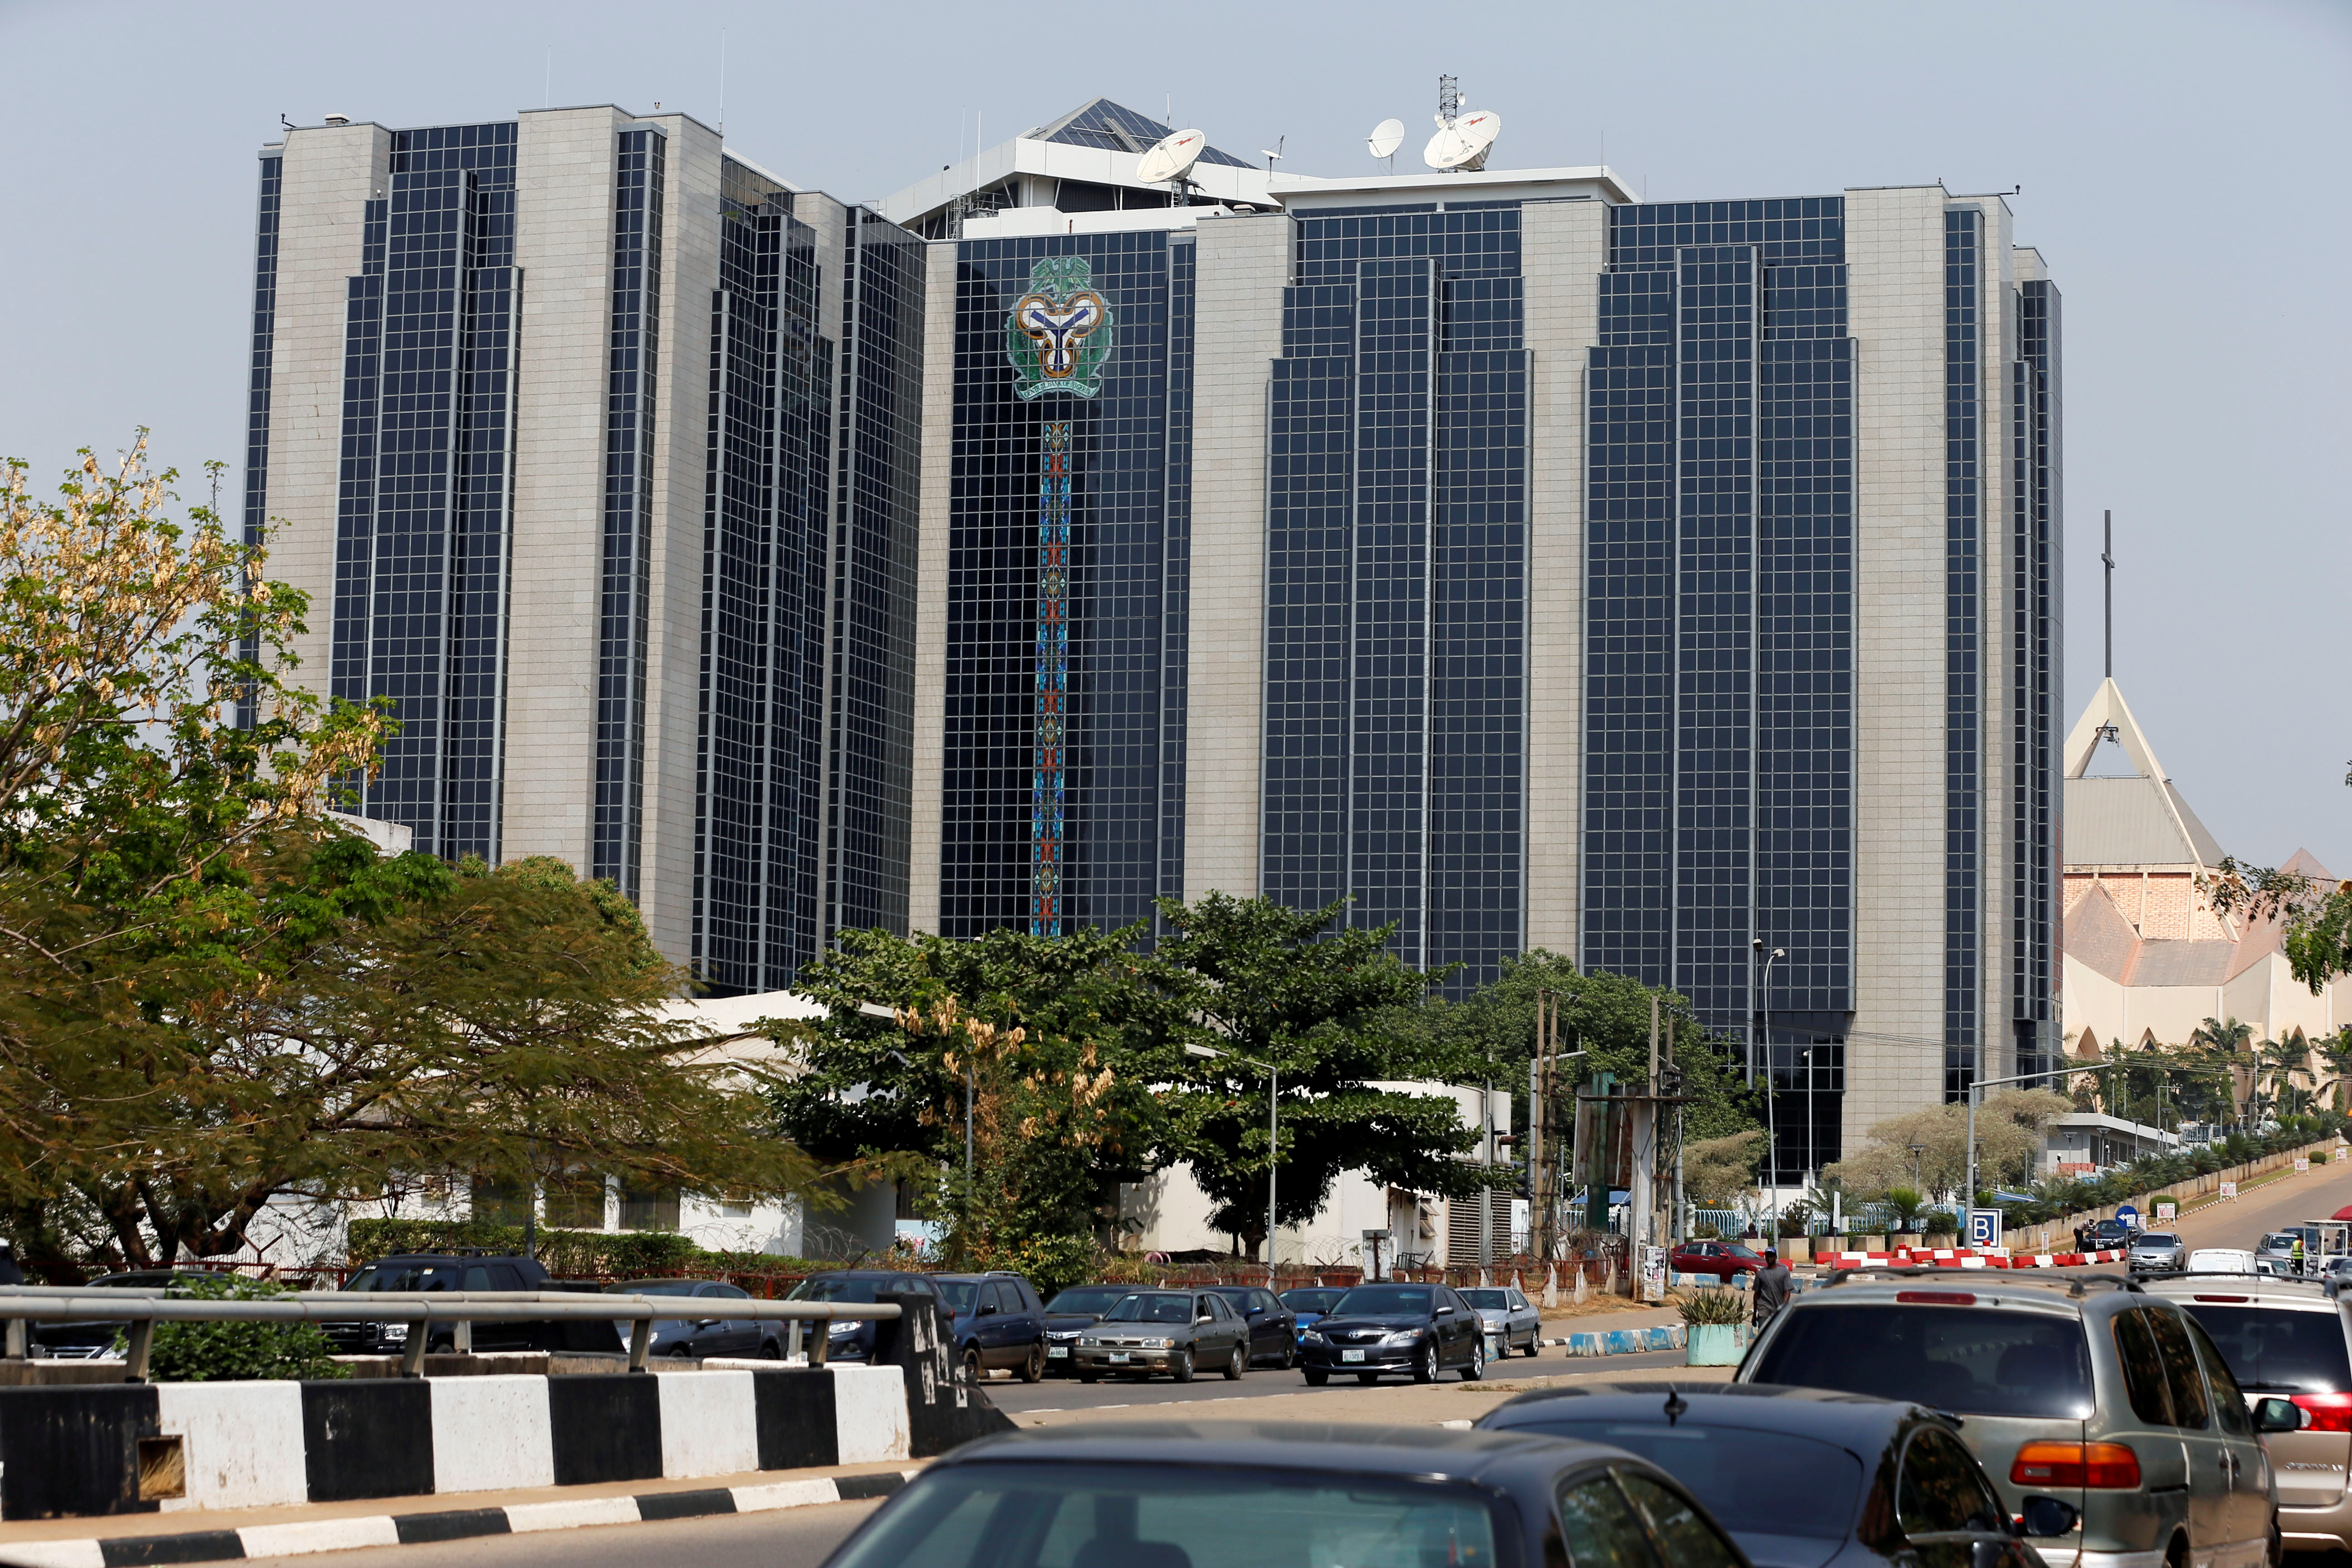 Central Bank of Nigeria's logo is seen on the headquarters building in Abuja